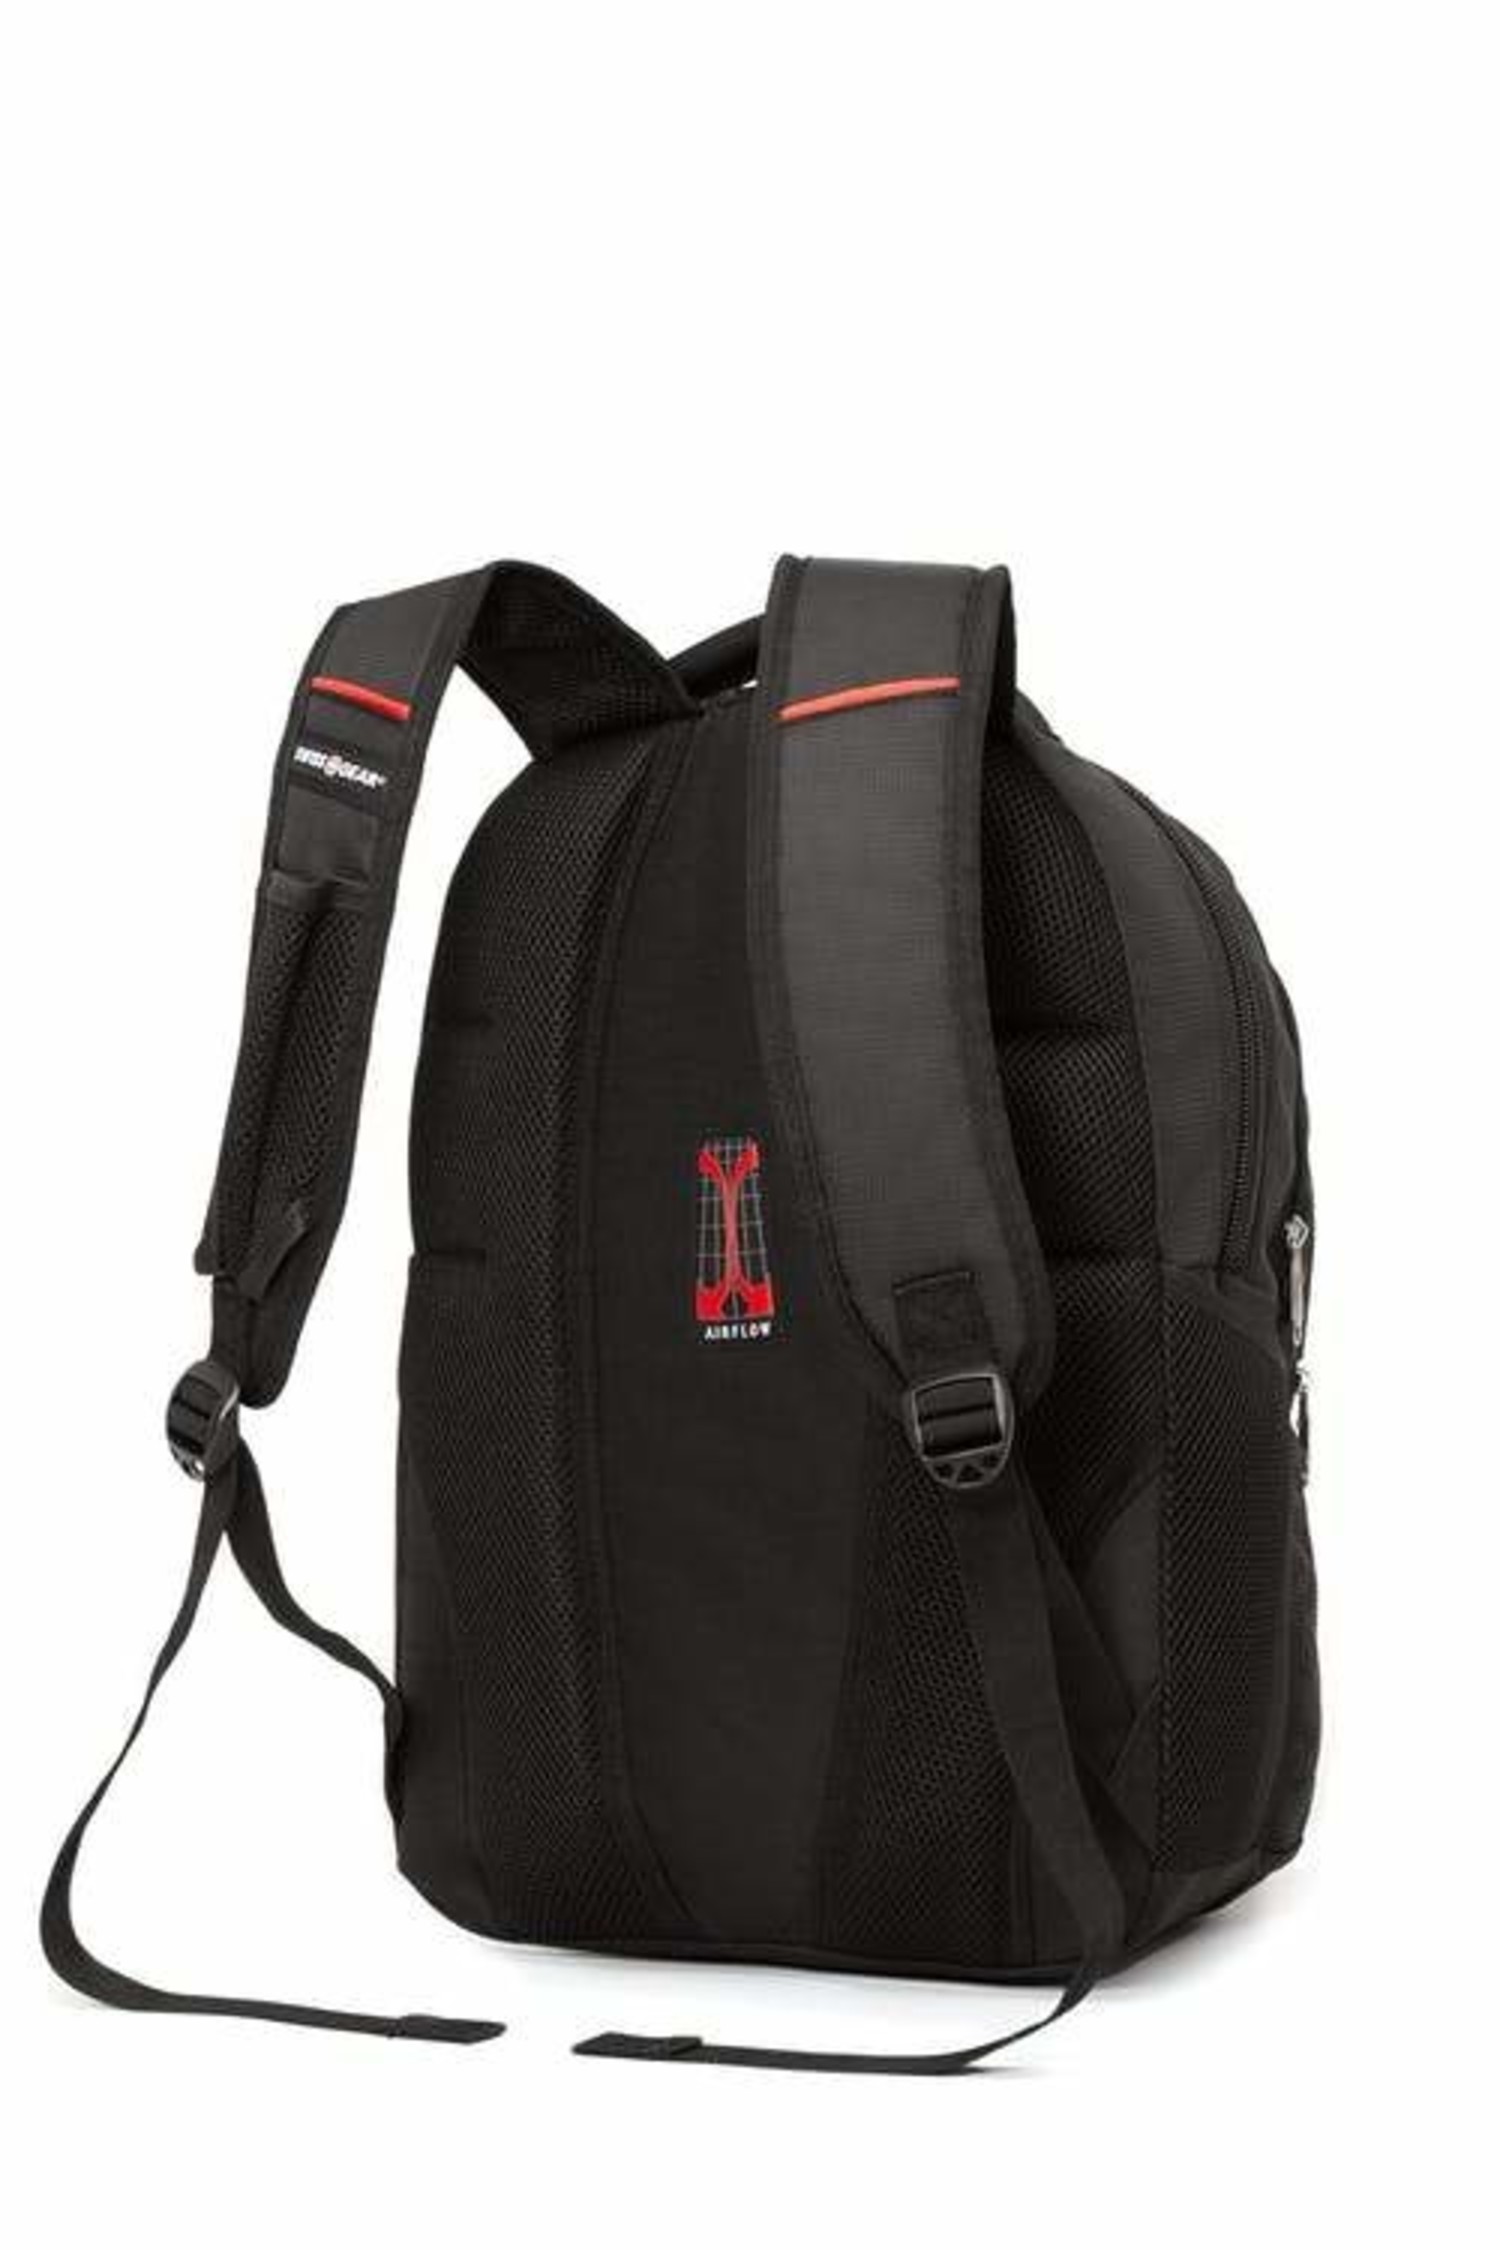 Swiss Gear 15 Inch Computer and Tablet Backpack - Black - Just Bags Luggage  Center